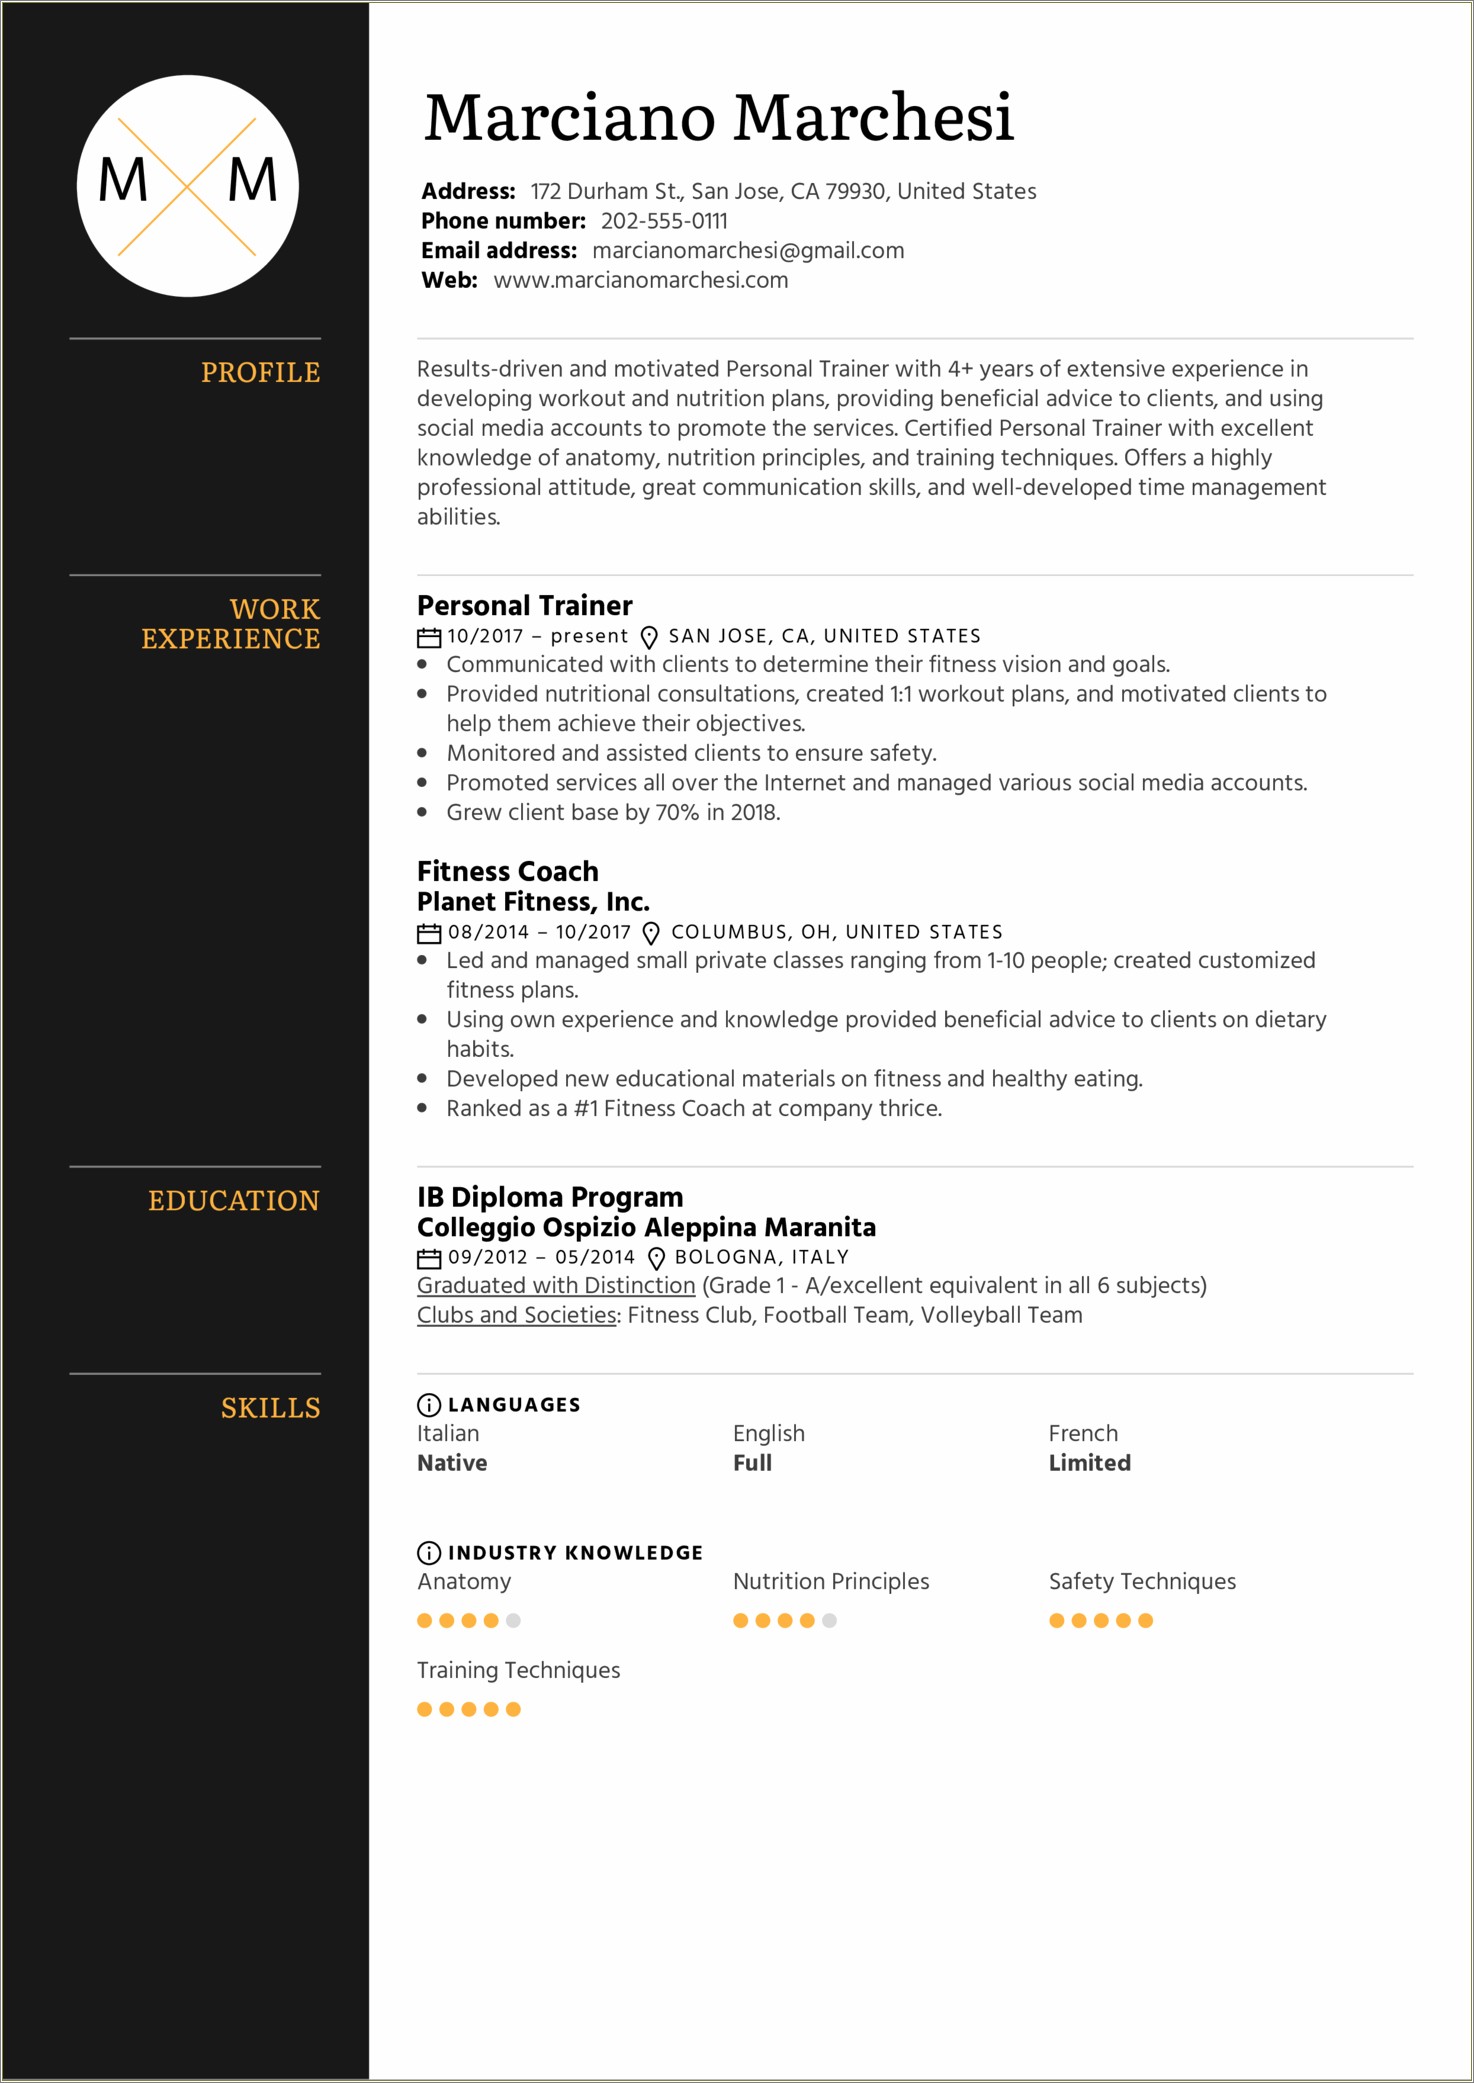 Description Of Personal Trainer For Resume